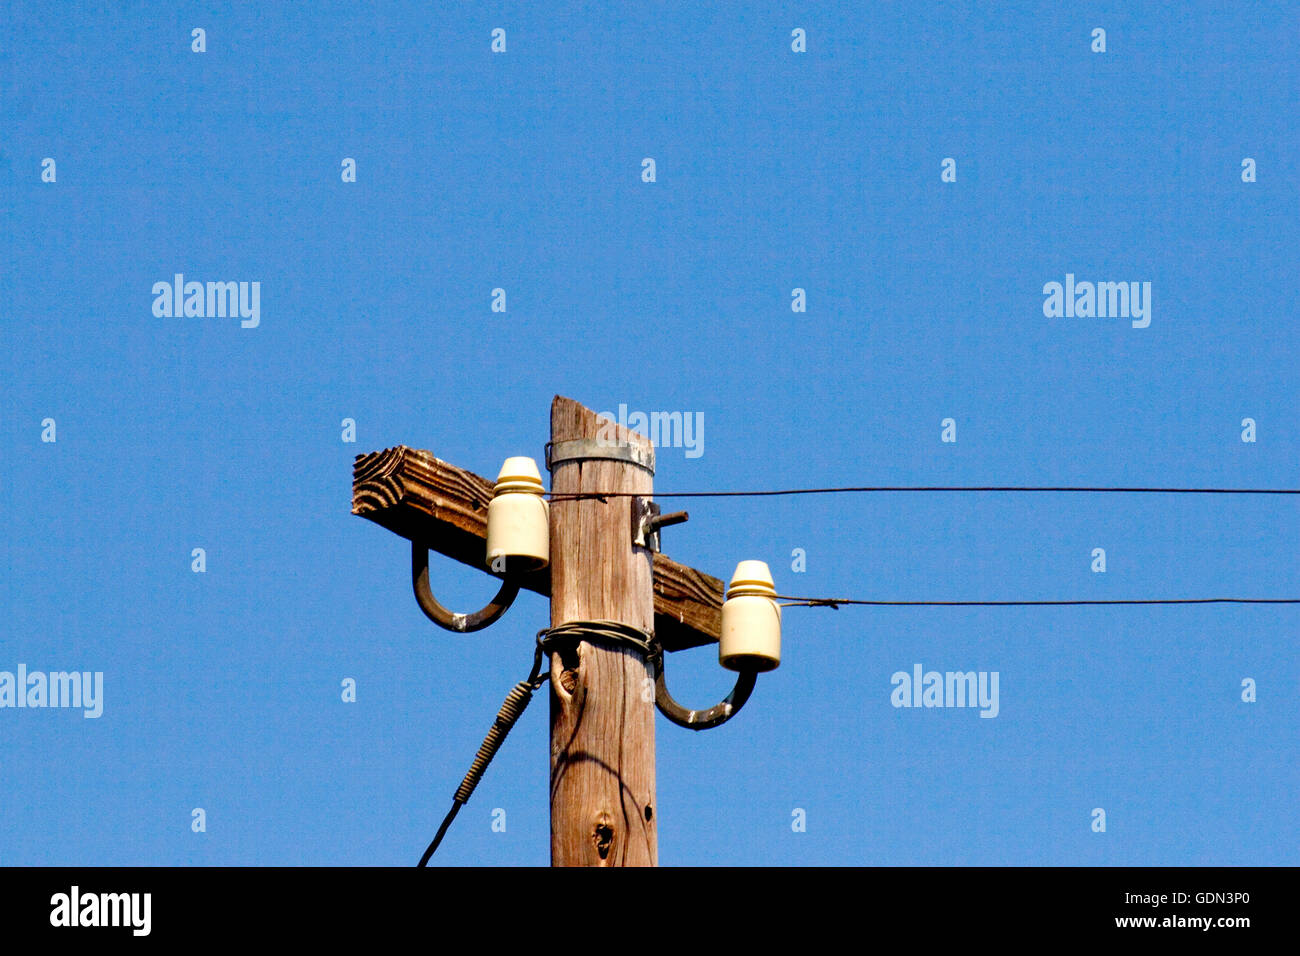 Telephone pole and wires Stock Photo